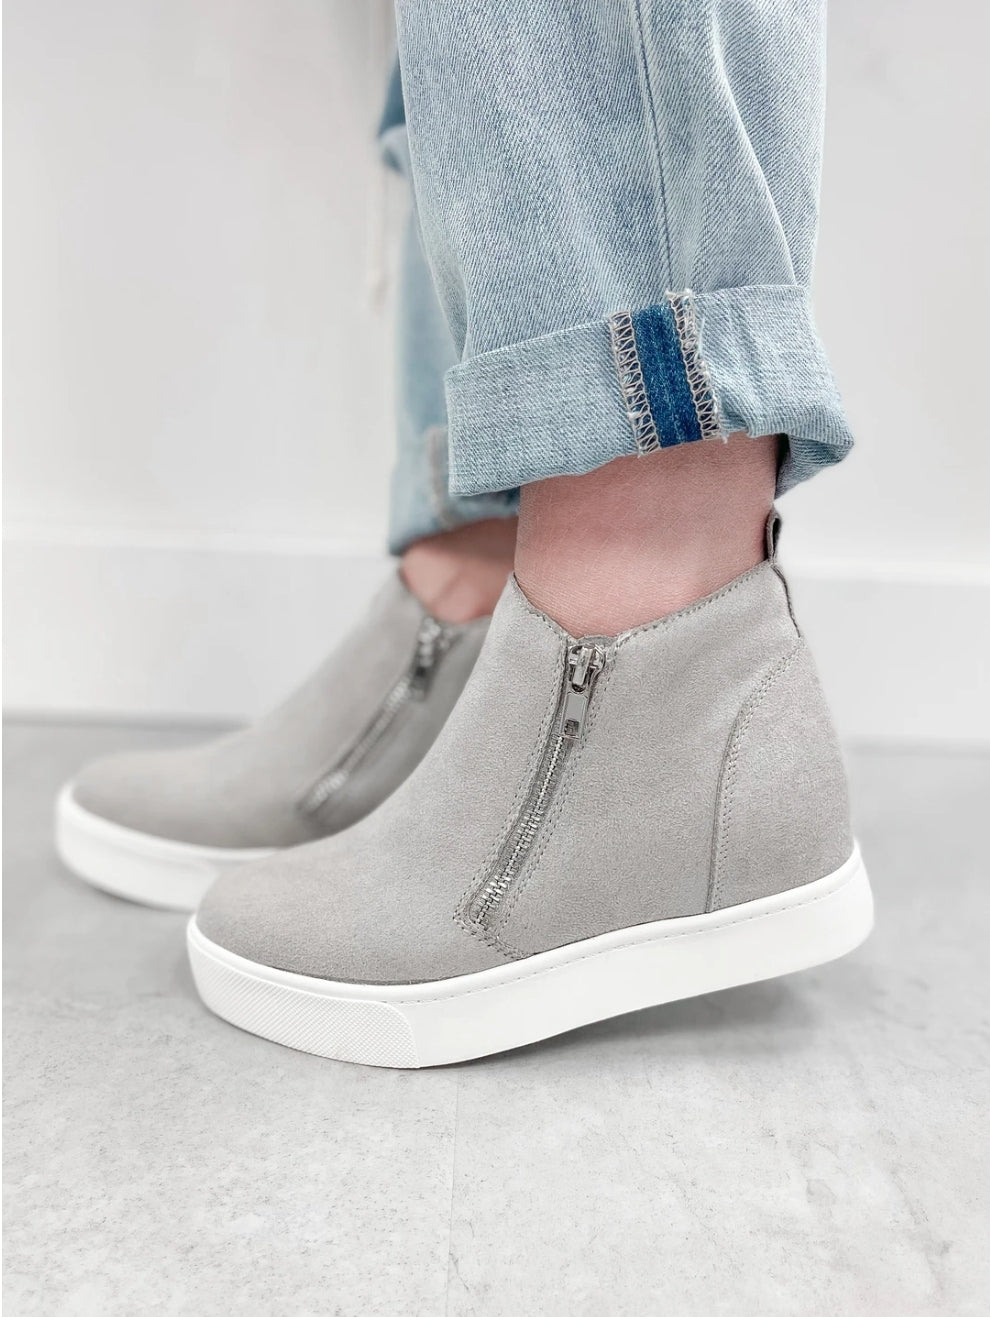 THE TAYLOR WEDGE SNEAKER IN GREY